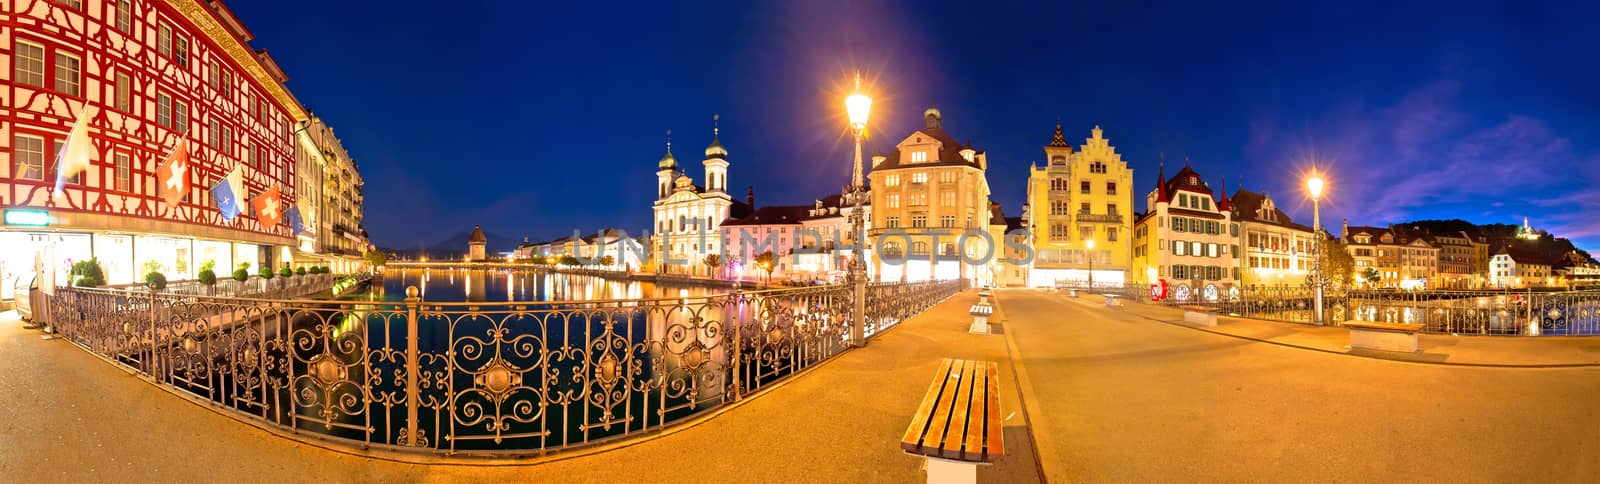 Luzern panoramic evening view of famous landmarks and Reuss rive by xbrchx